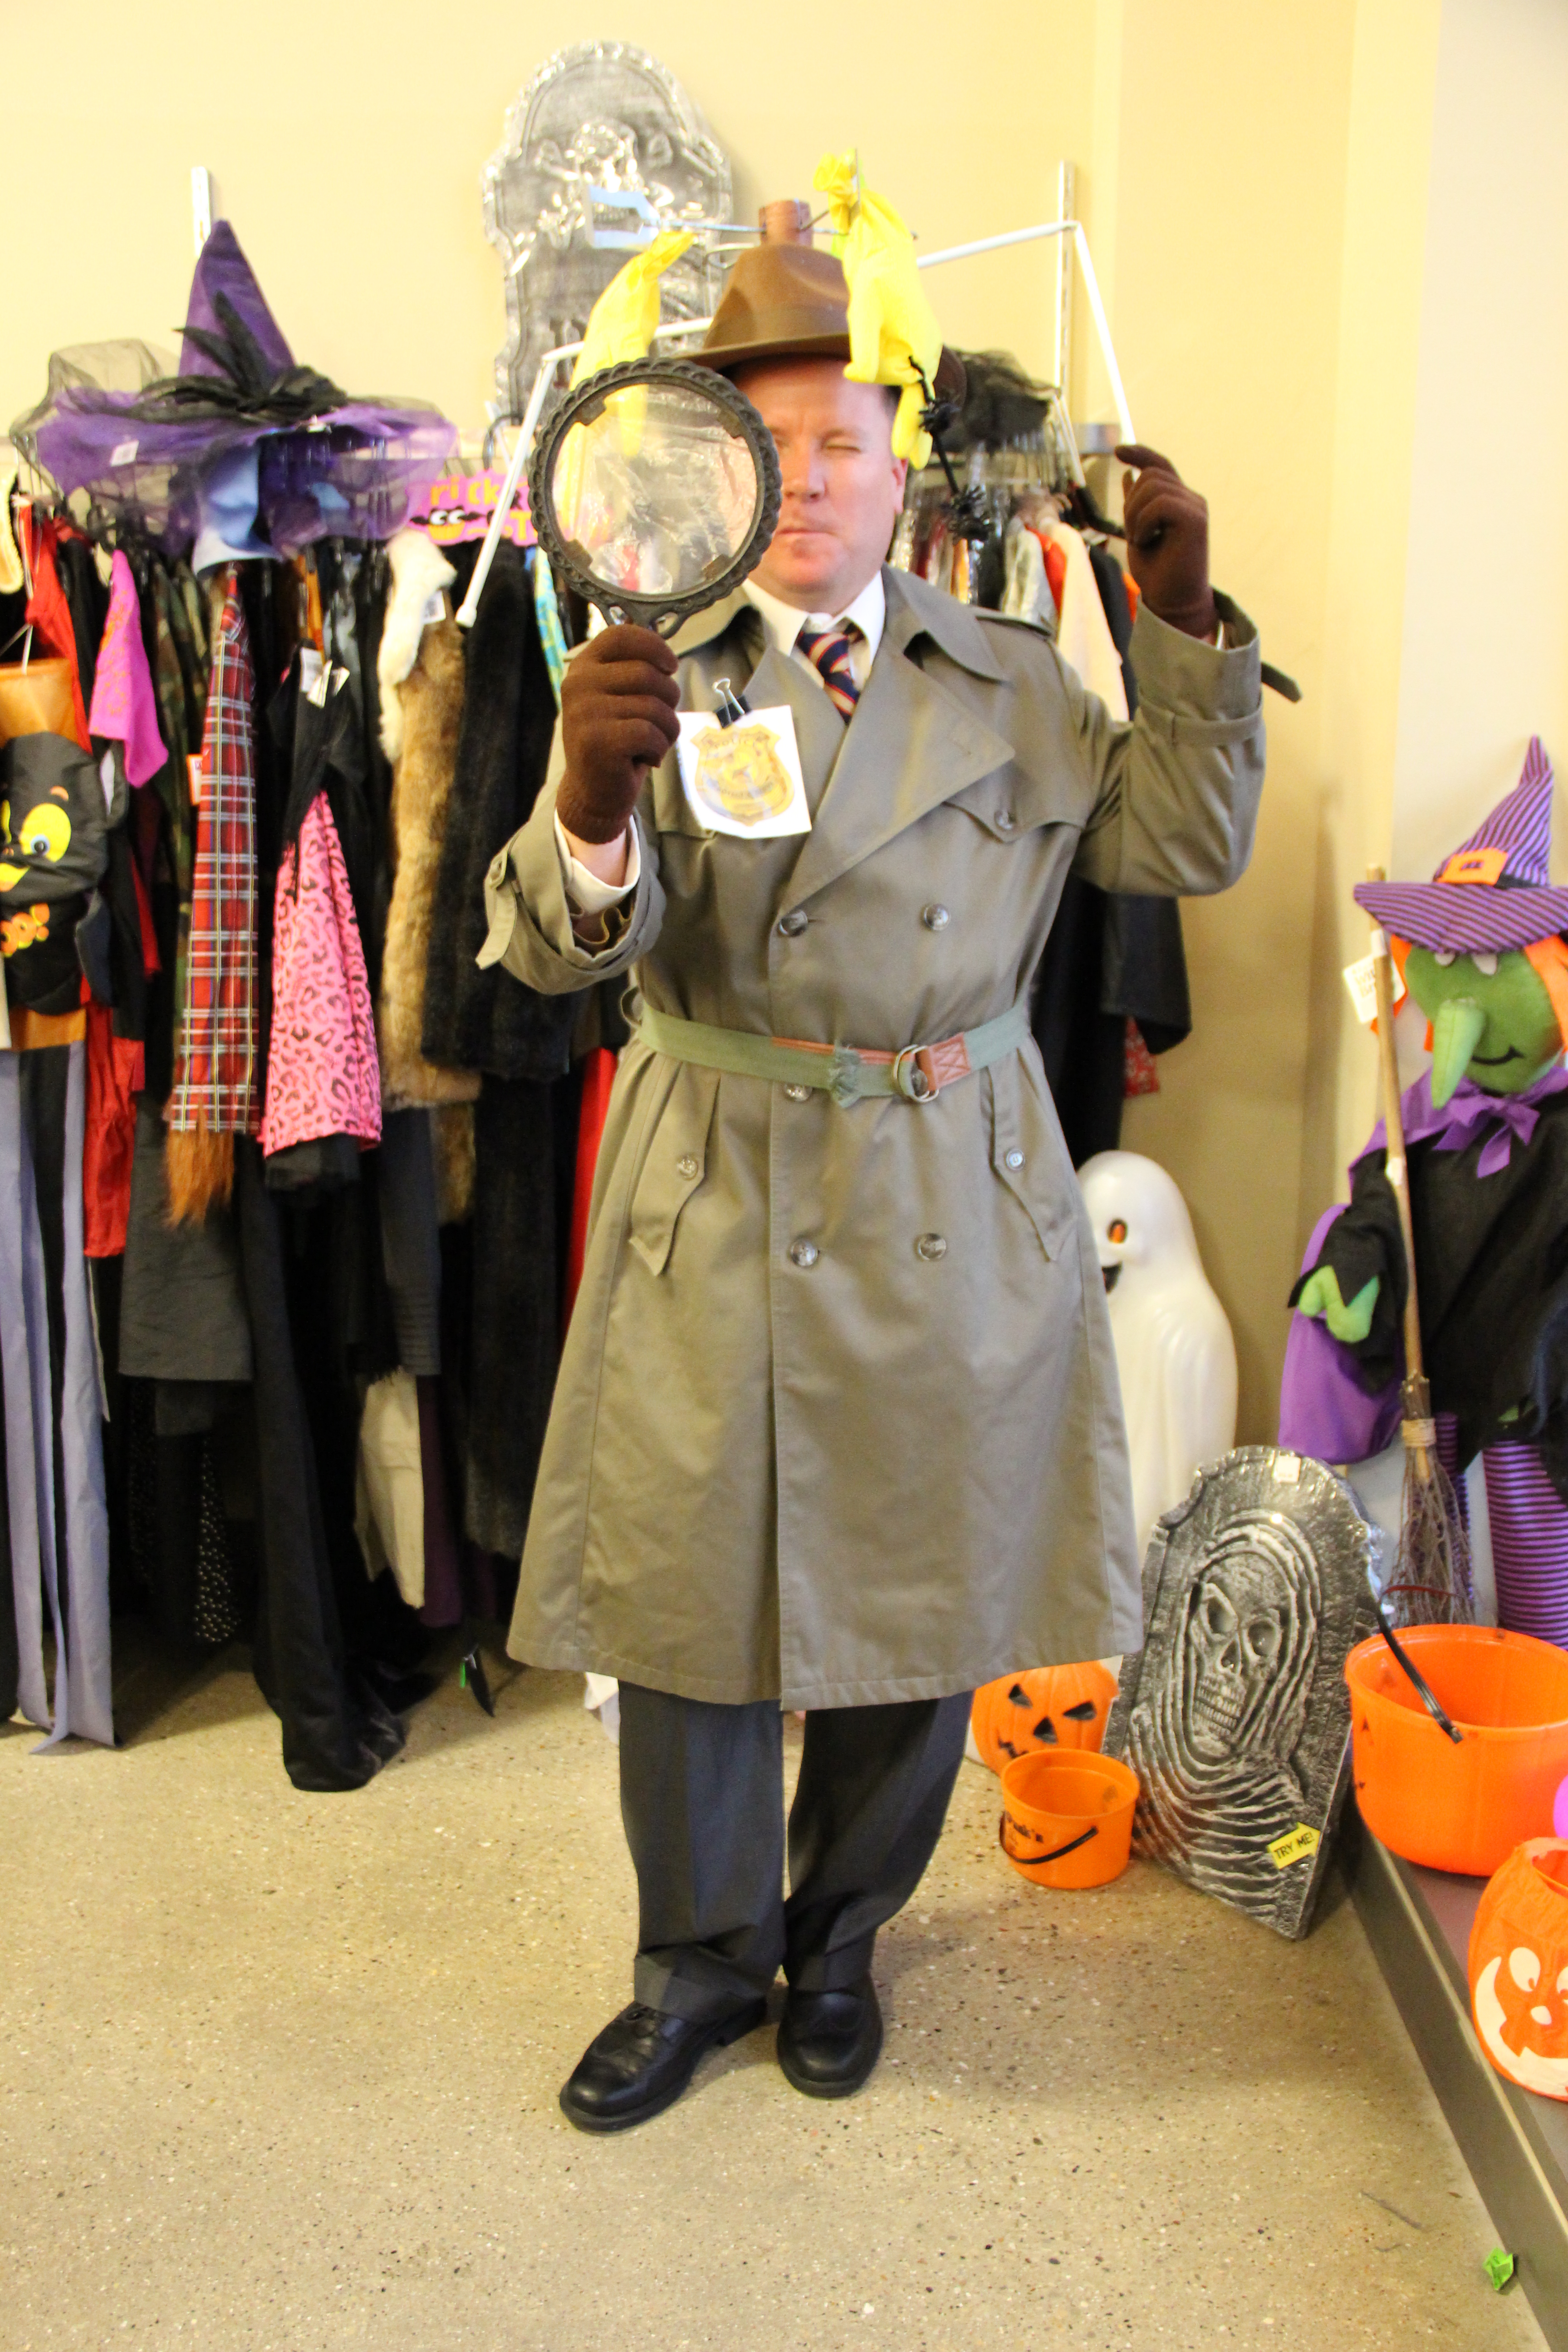 Inspector Gadget is a no-sew, easy costume.